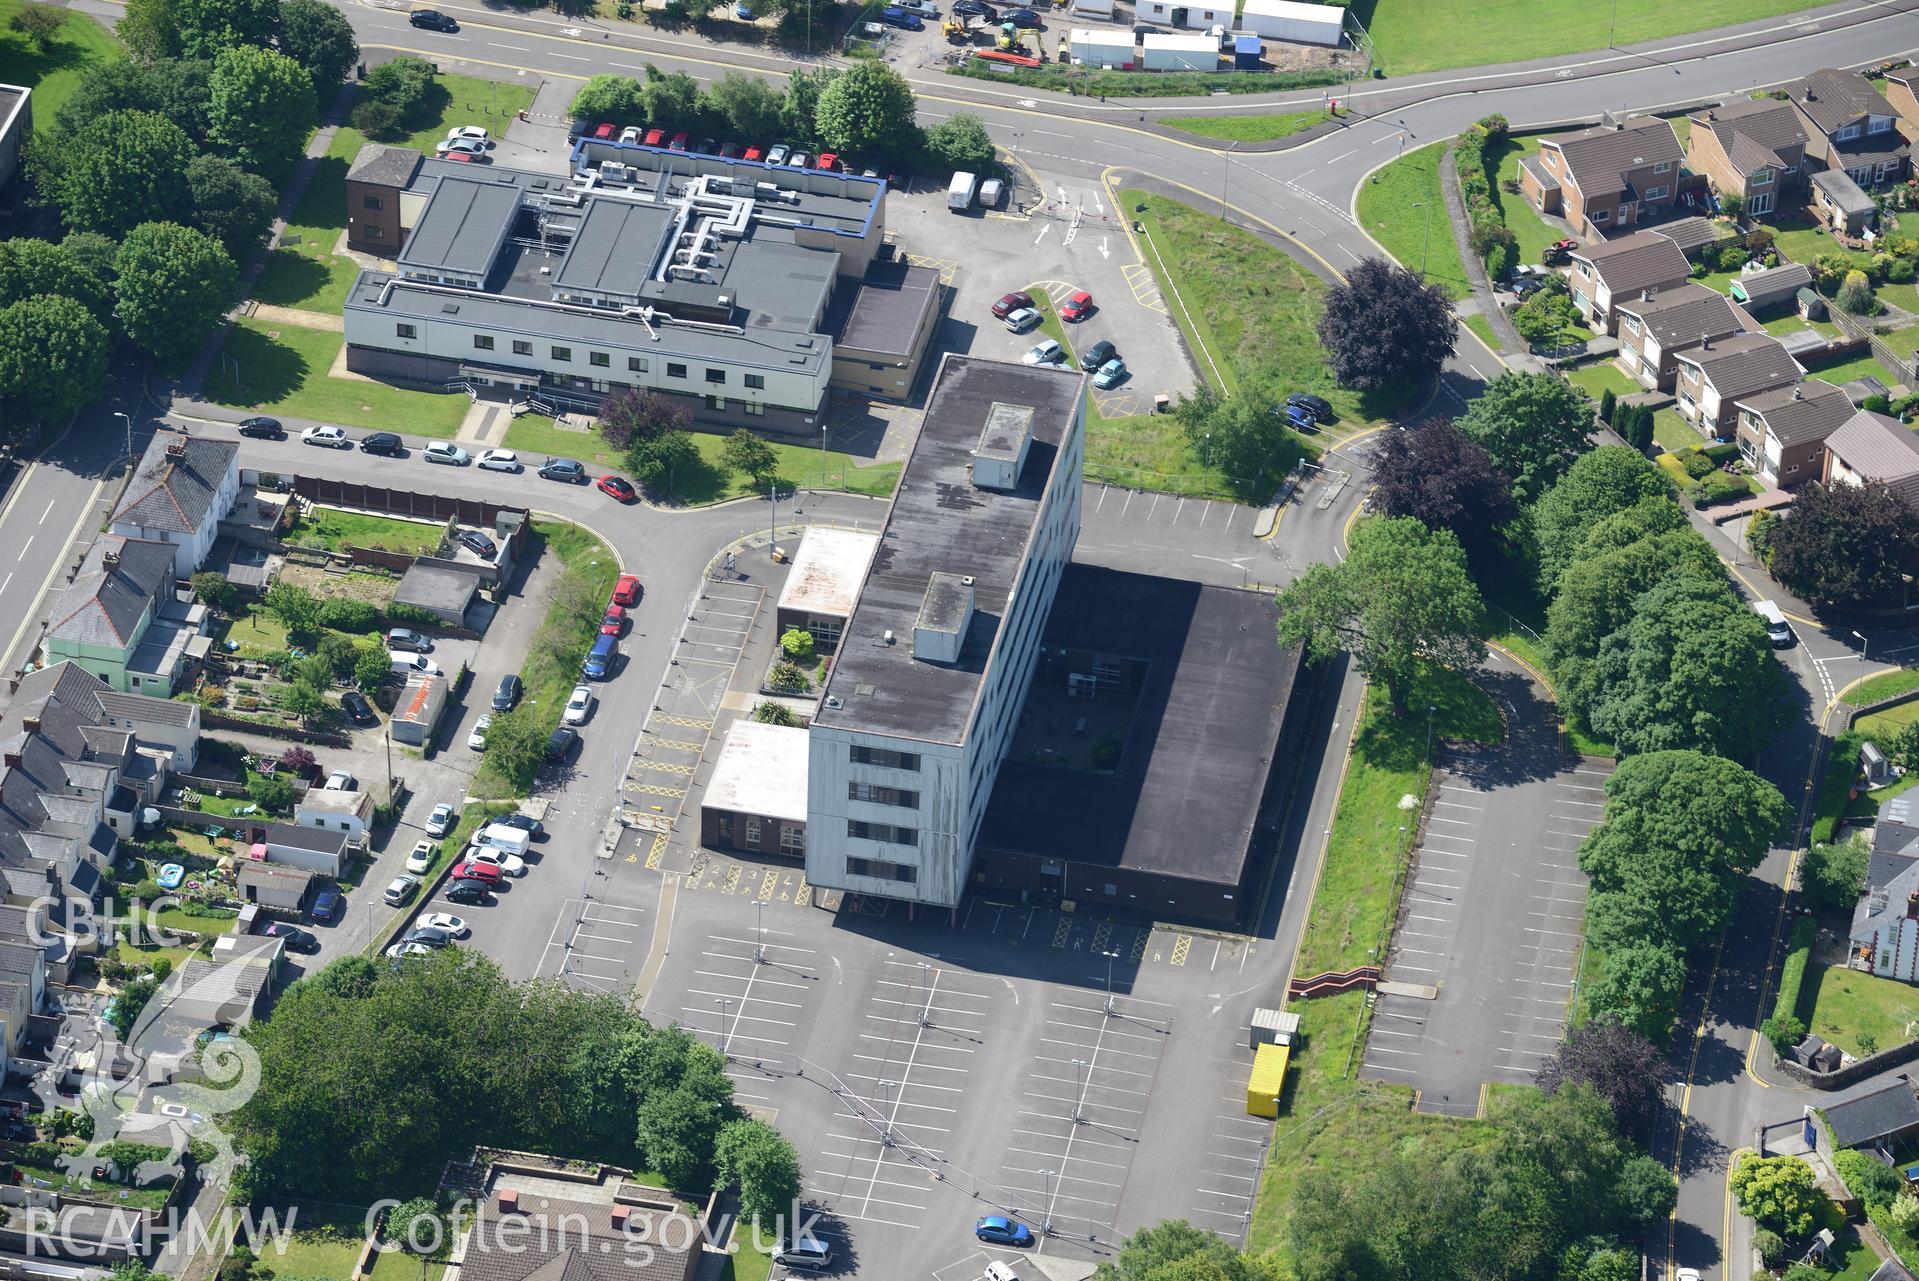 Bridgend Magistrates Court and other County Offices, Bridgend. Oblique aerial photograph taken during the Royal Commission's programme of archaeological aerial reconnaissance by Toby Driver on 19th June 2015.